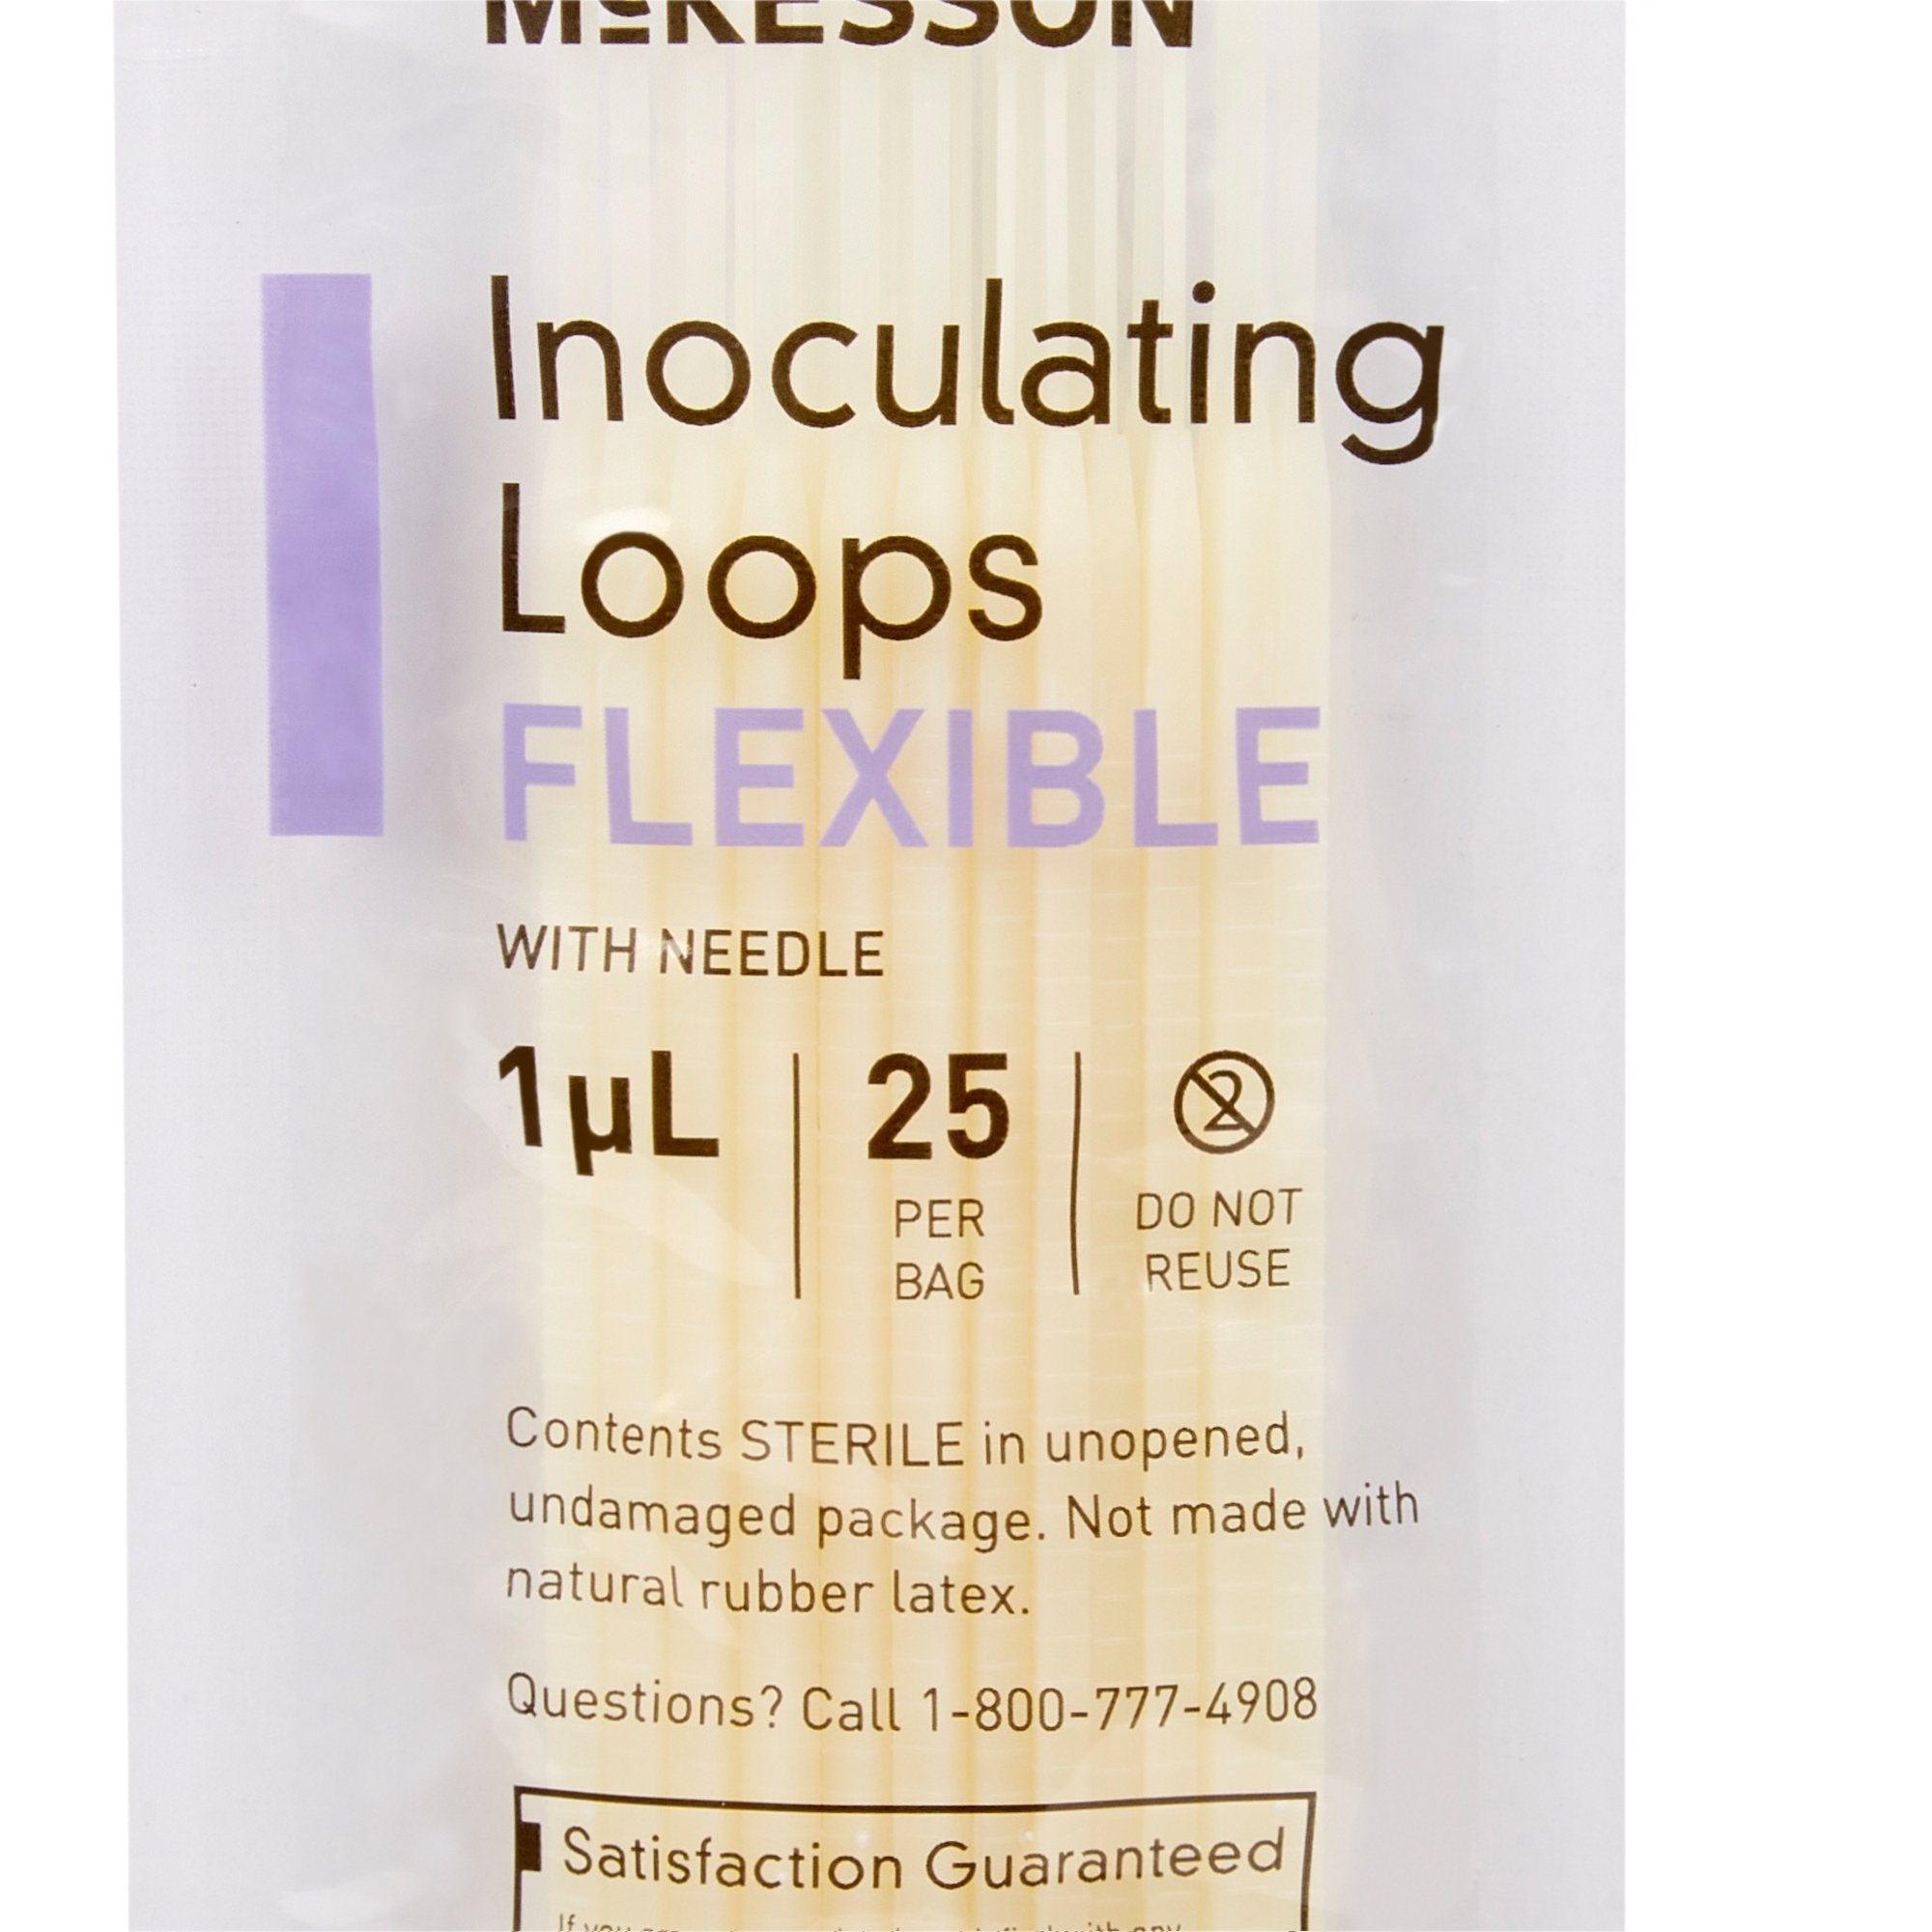 Inoculating Loop with Needle McKesson 1 L ABS Integrated Handle Sterile